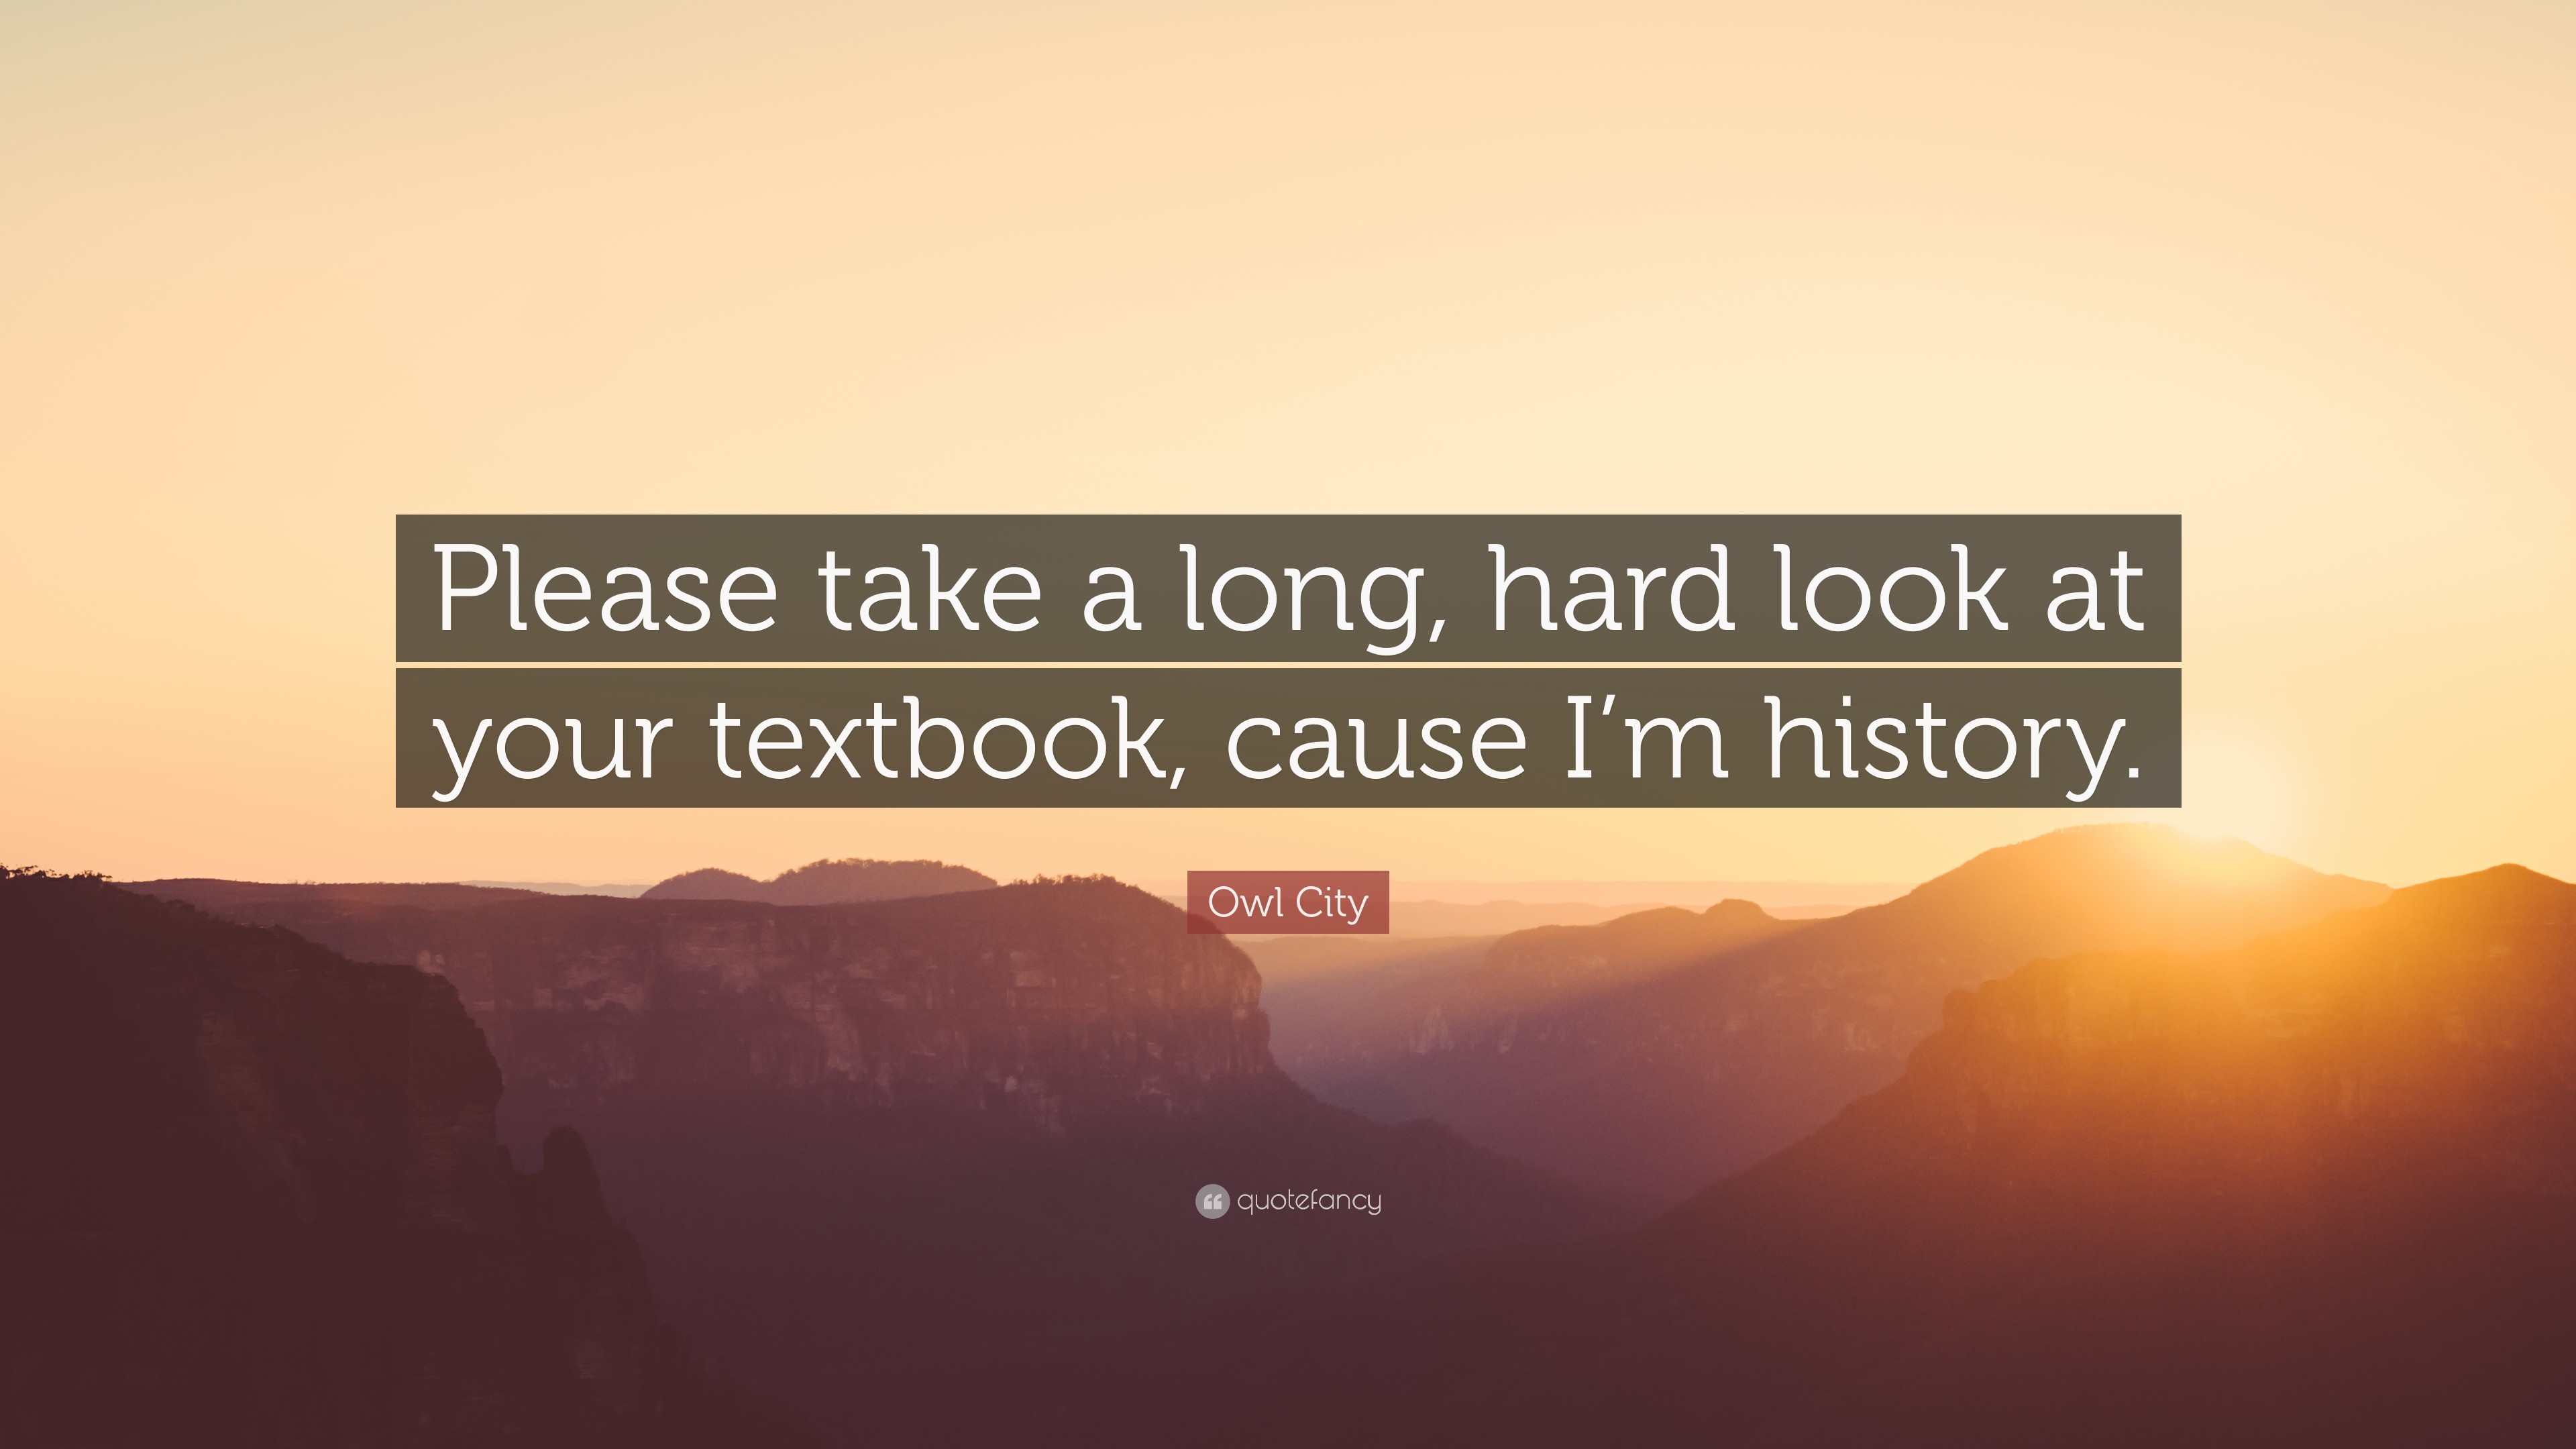 3840x2160 Owl City Quote: “Please take a long, hard look at your textbook,